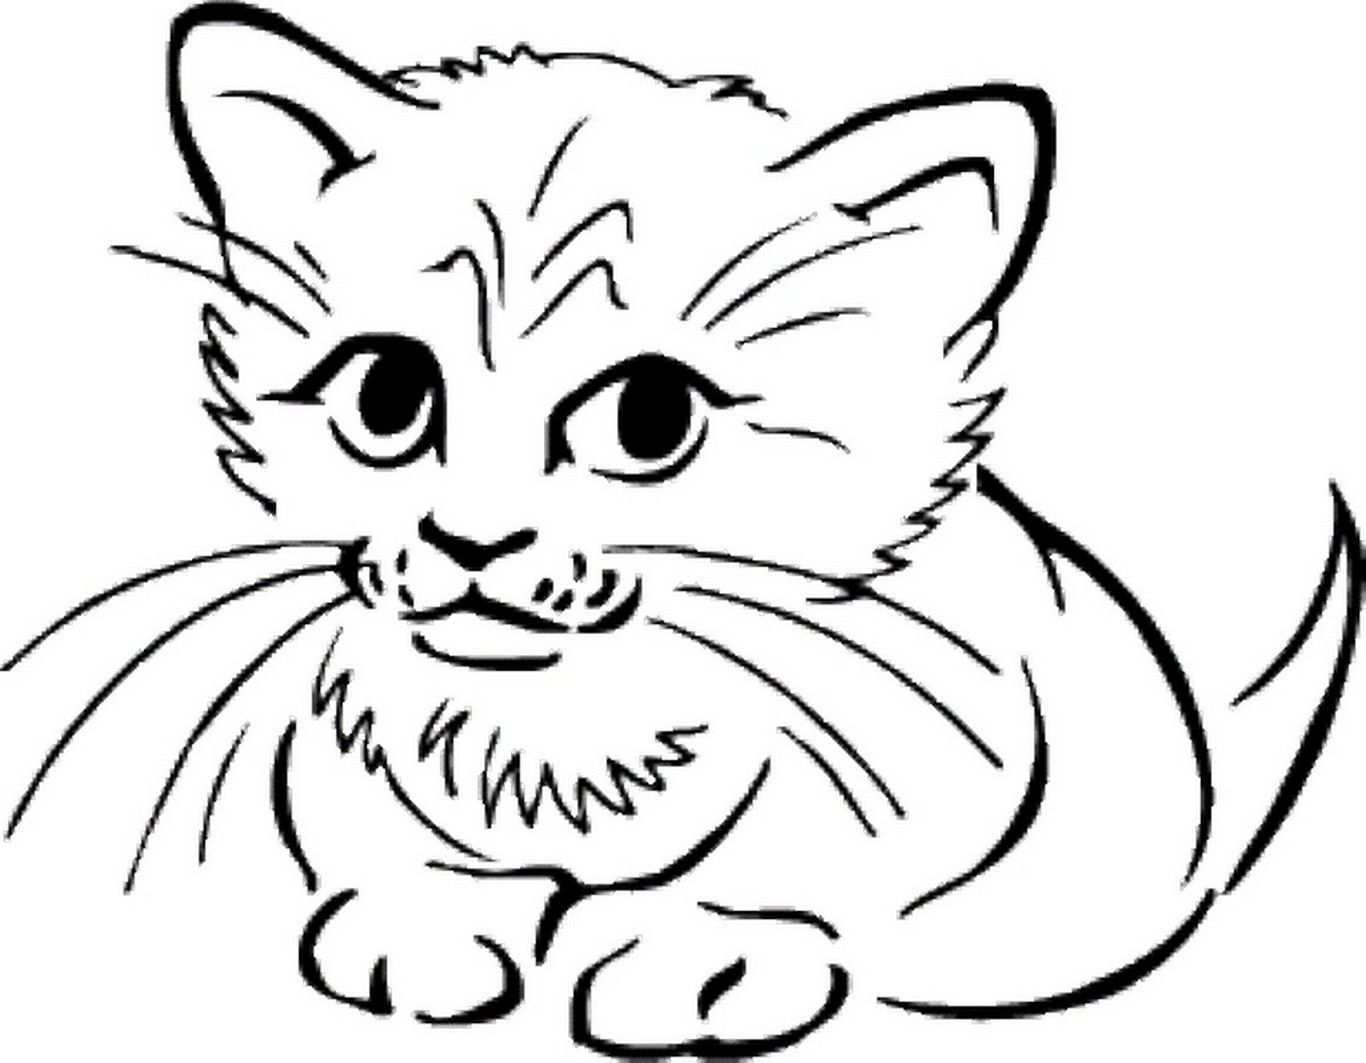 Kitty Cat Coloring Pages Animal Coloring Pages Puppy Coloring Pages Cat Coloring Page